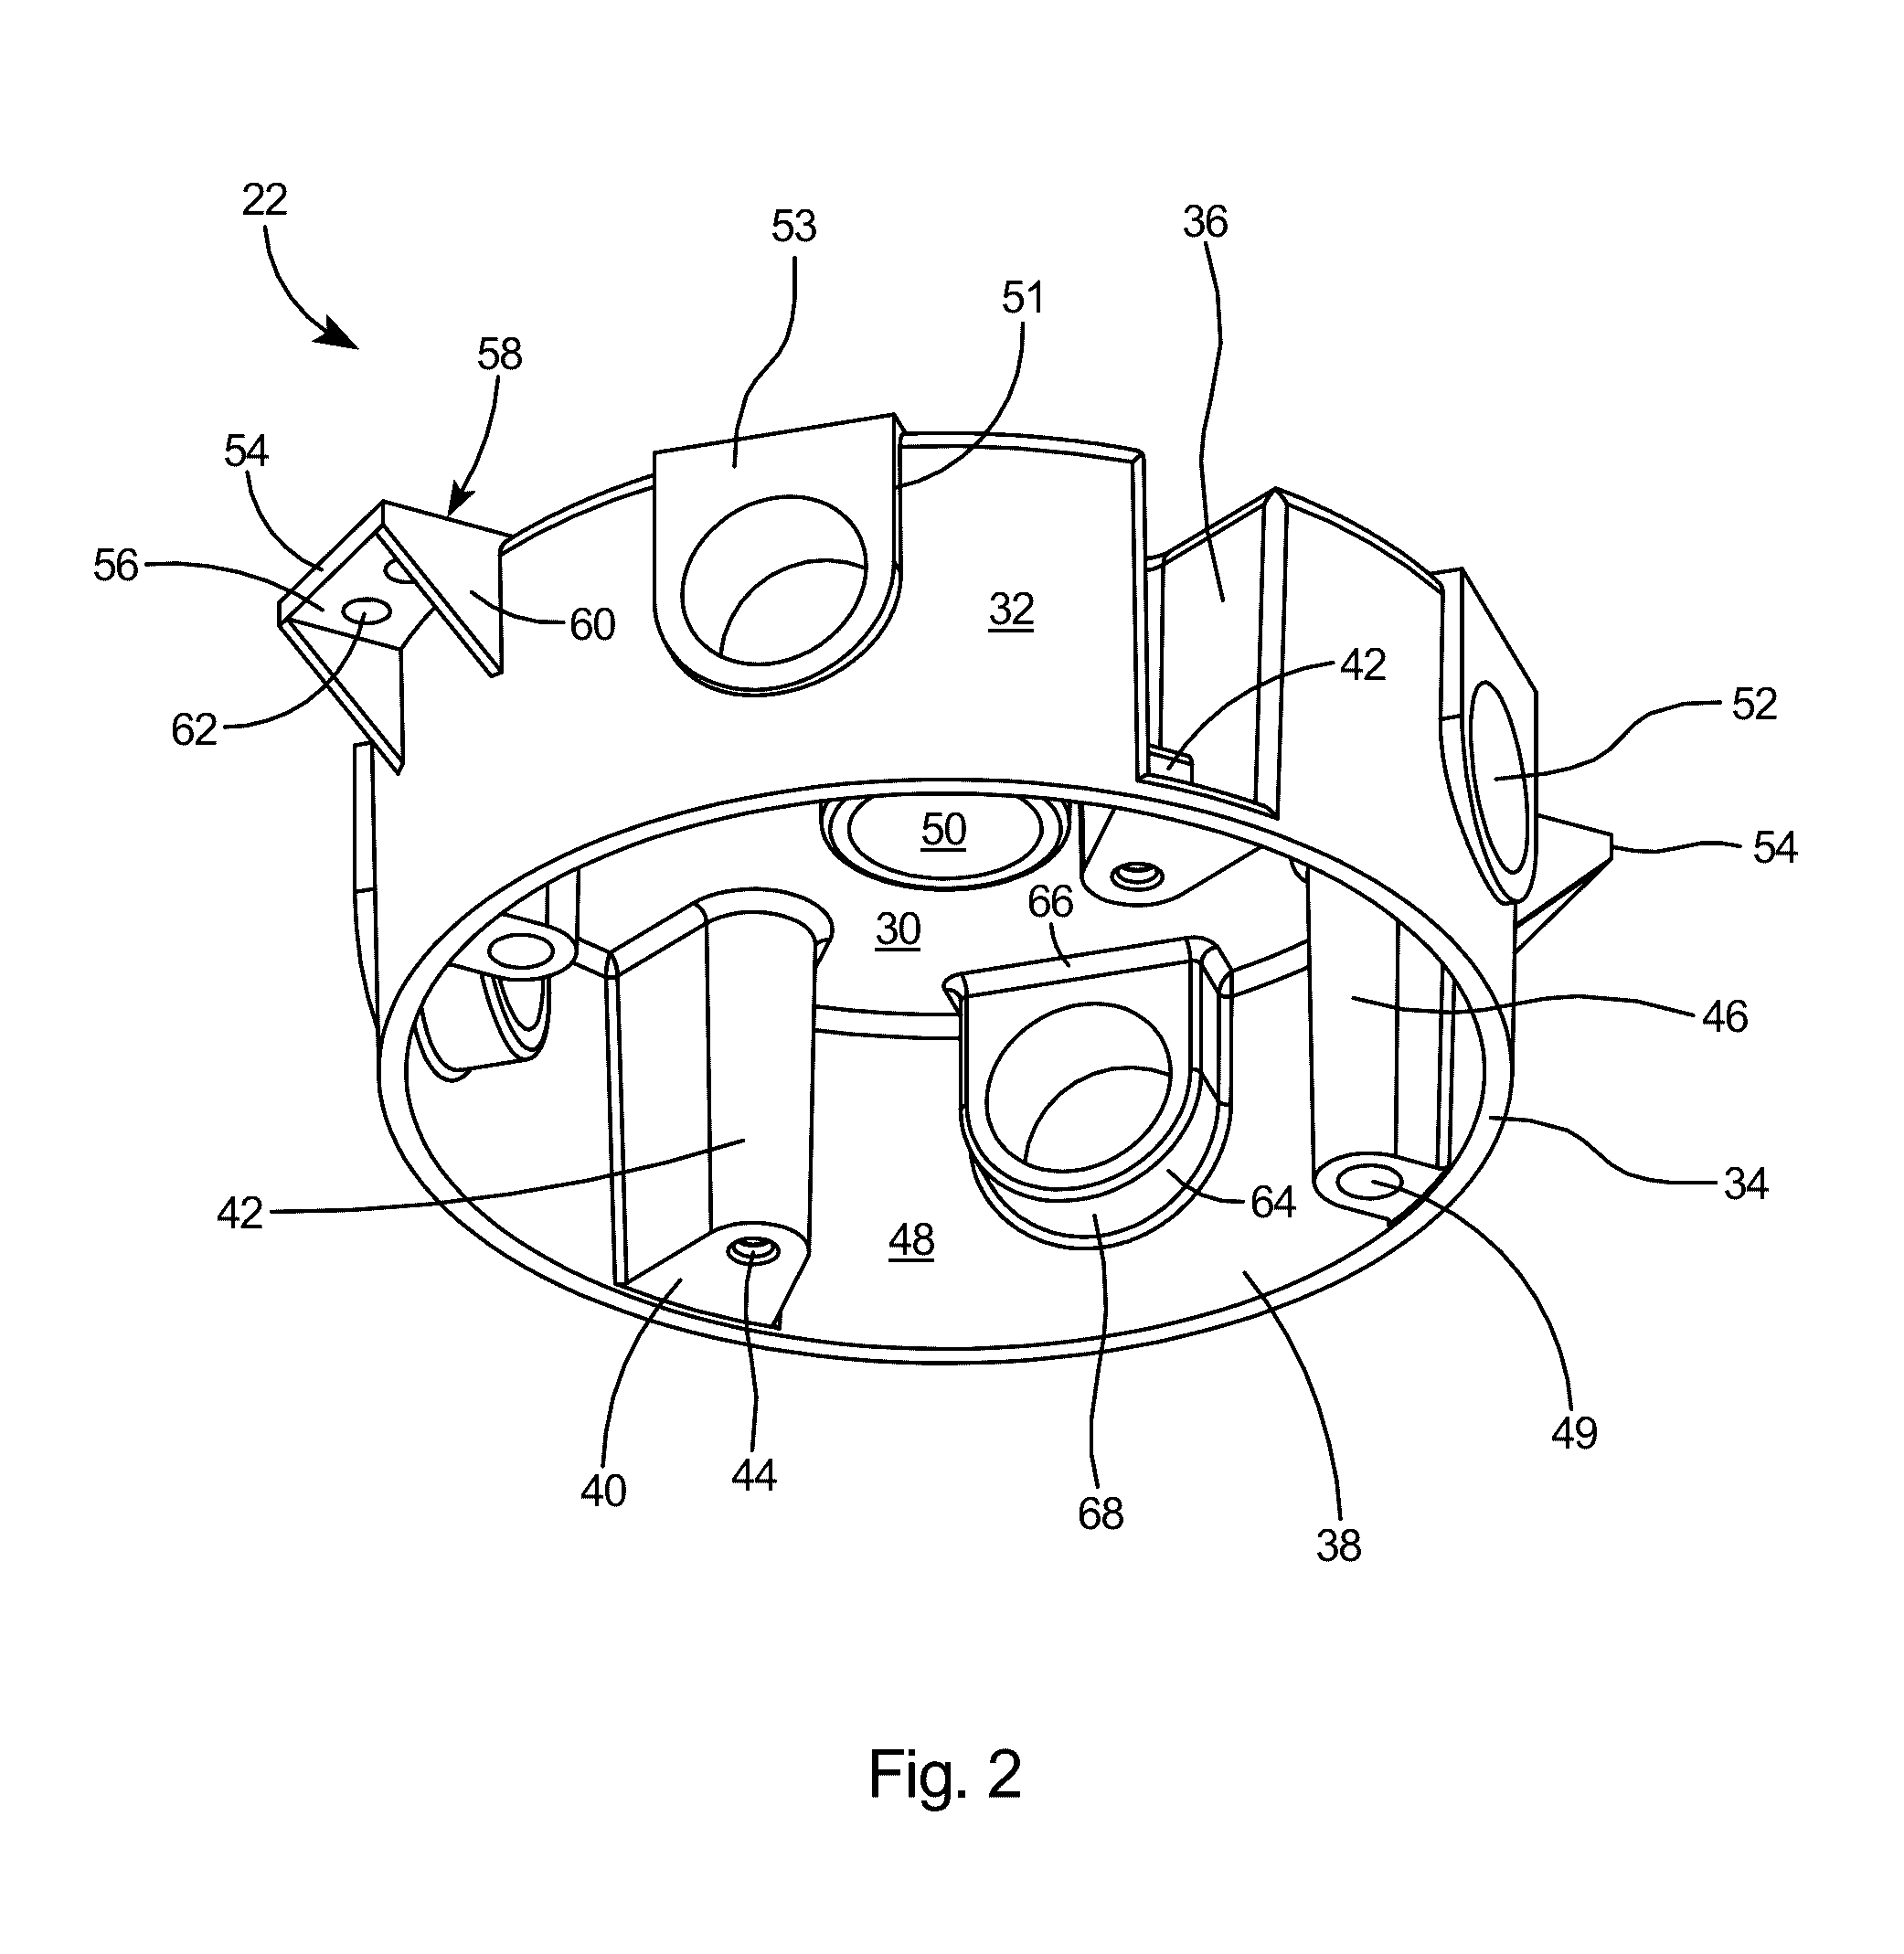 Rain tight electrical box assembly for mounting of an electrical fan or fixture